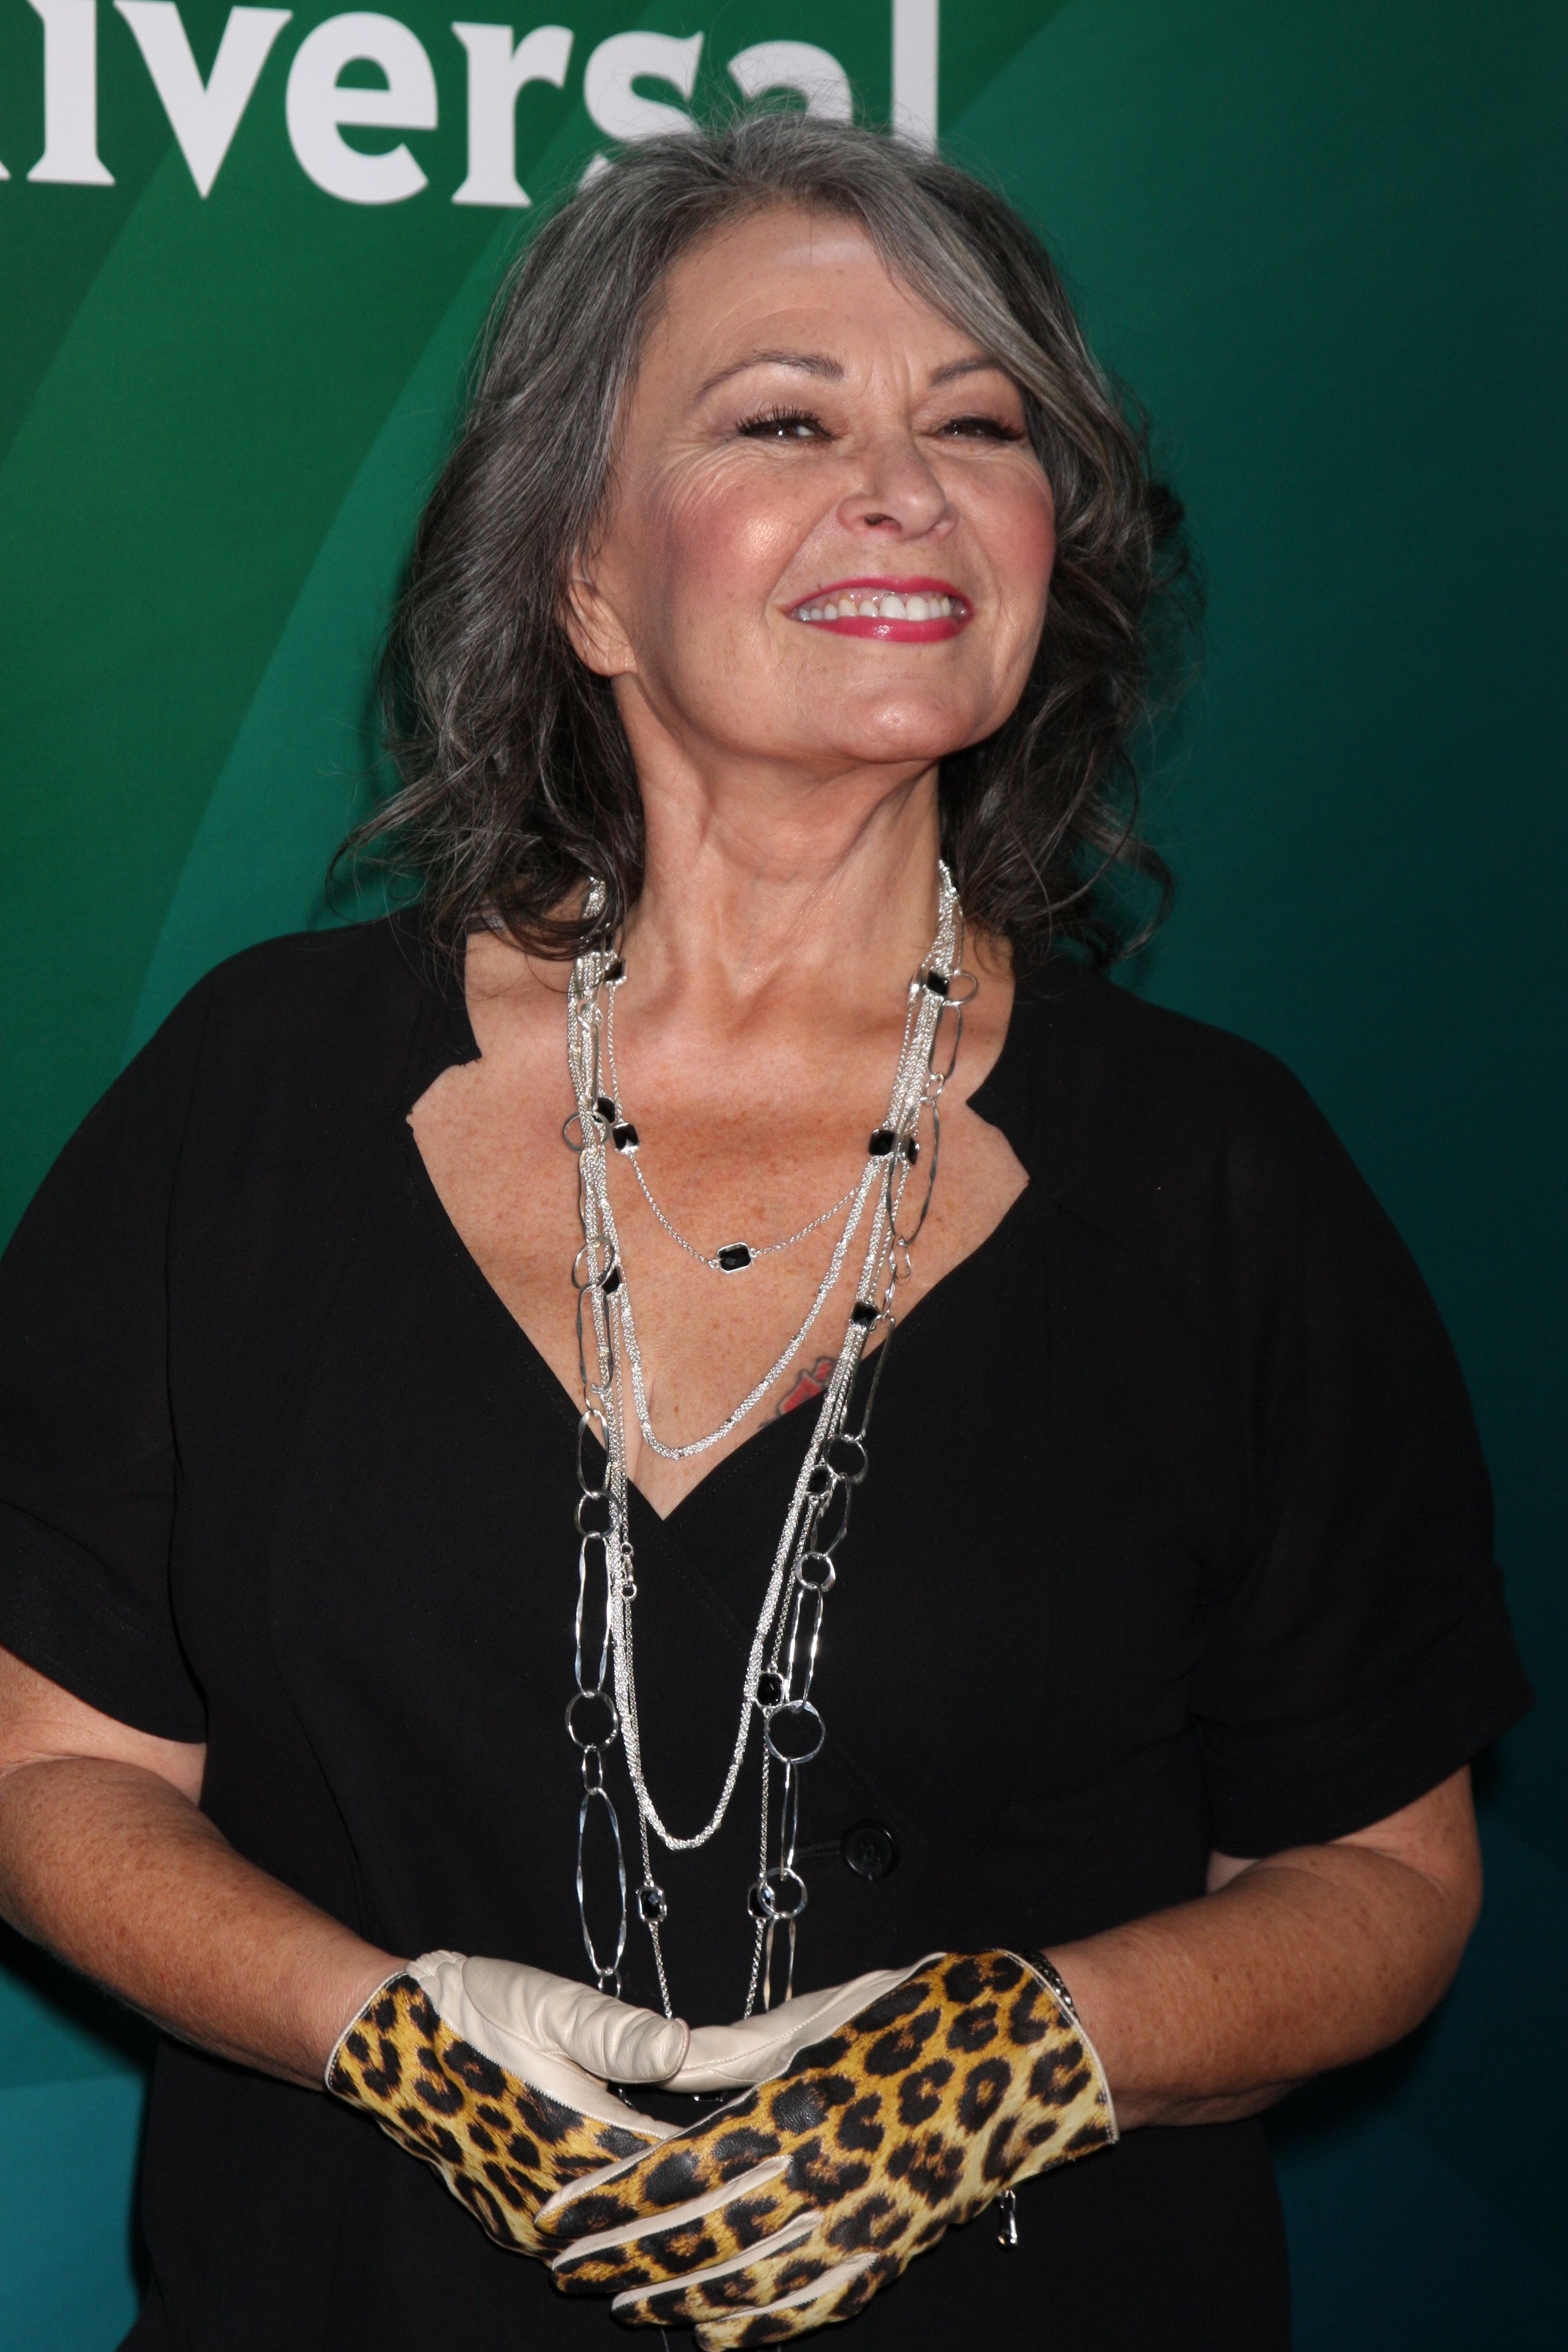 Roseanne Barr smiles for the camera as she wears a black top, statement chain necklace, and leopard-print gloves at an event.